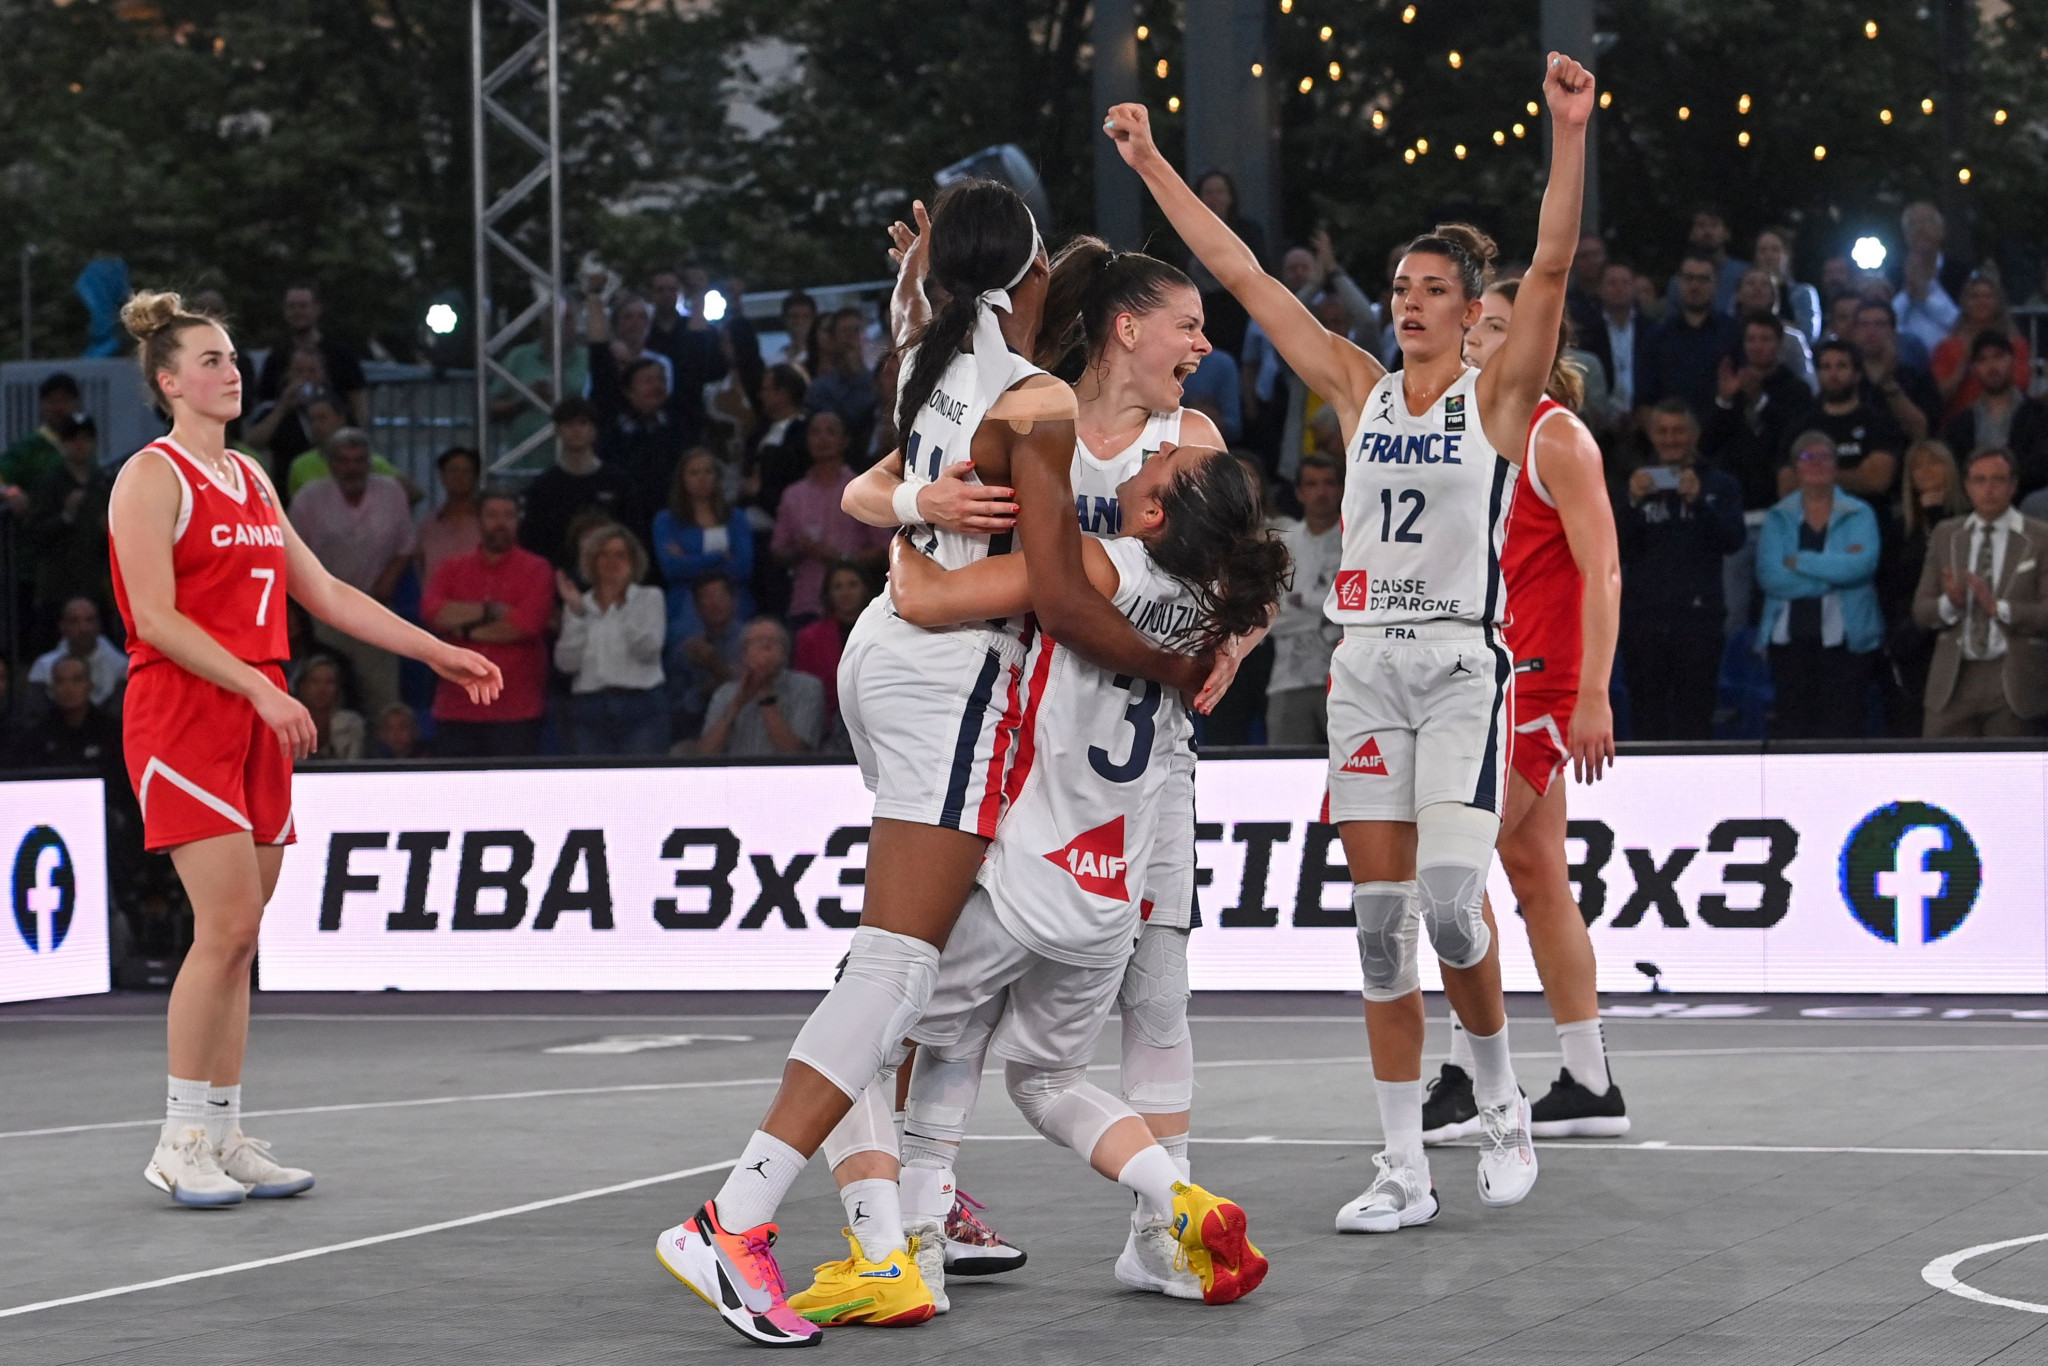 France are one of four teams unbeaten after the pool stage of the FIBA 3x3 Europe Cup in Graz ©Getty Images